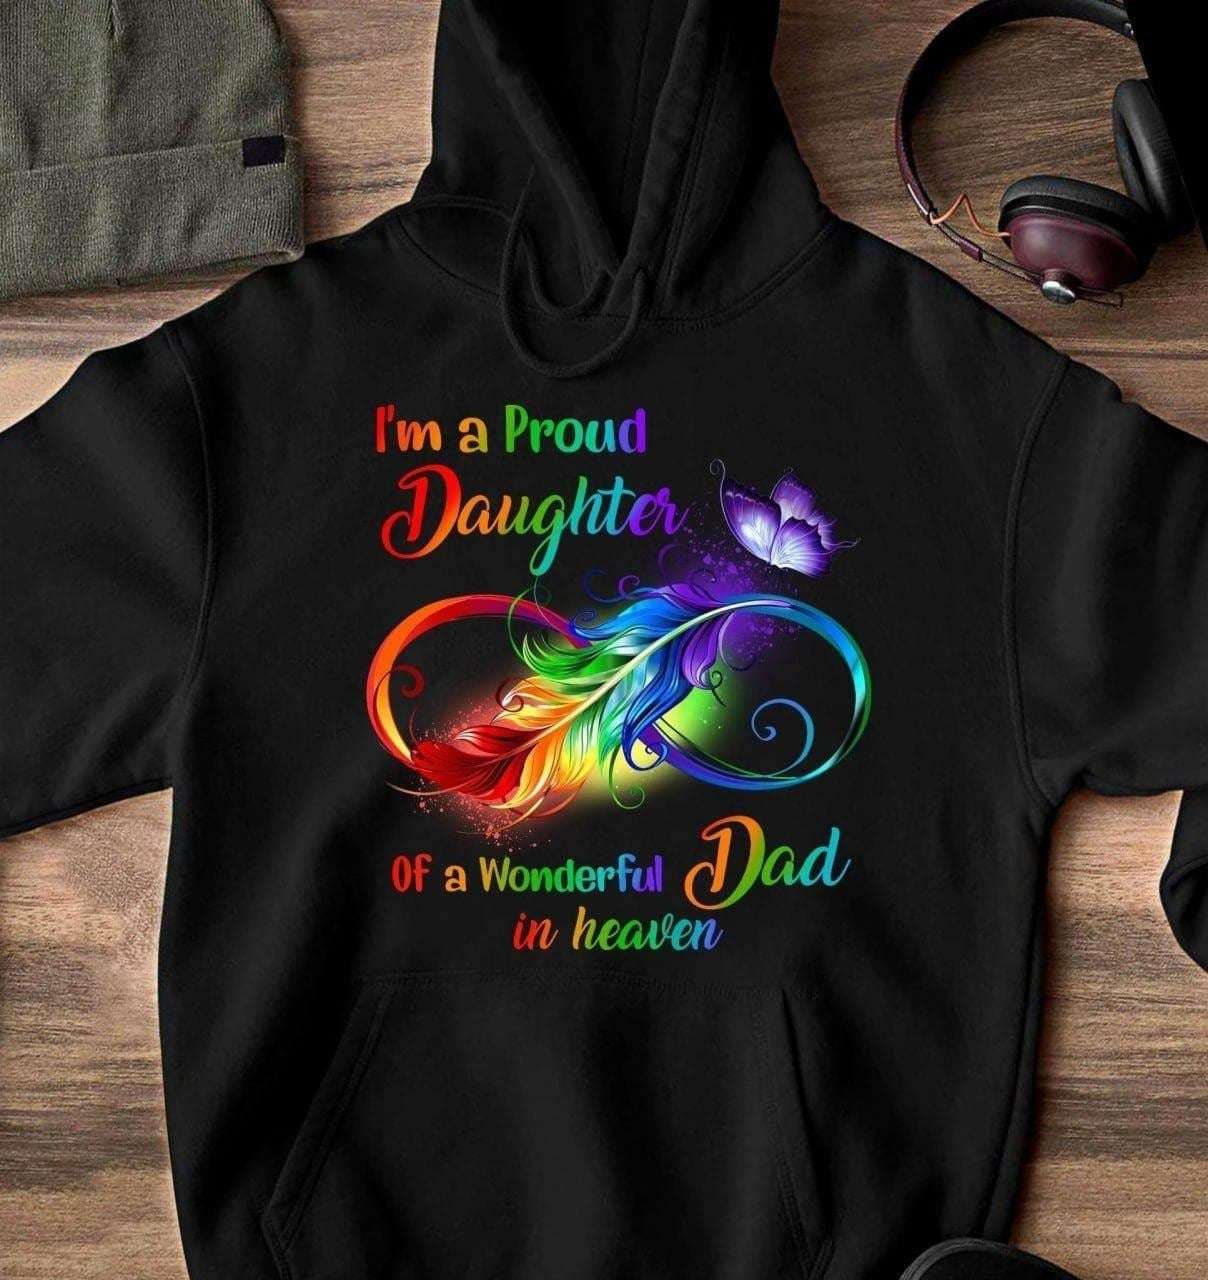 I'm a proud daughter of a wonderful dad in heaven - Father and daughter, father's day gift